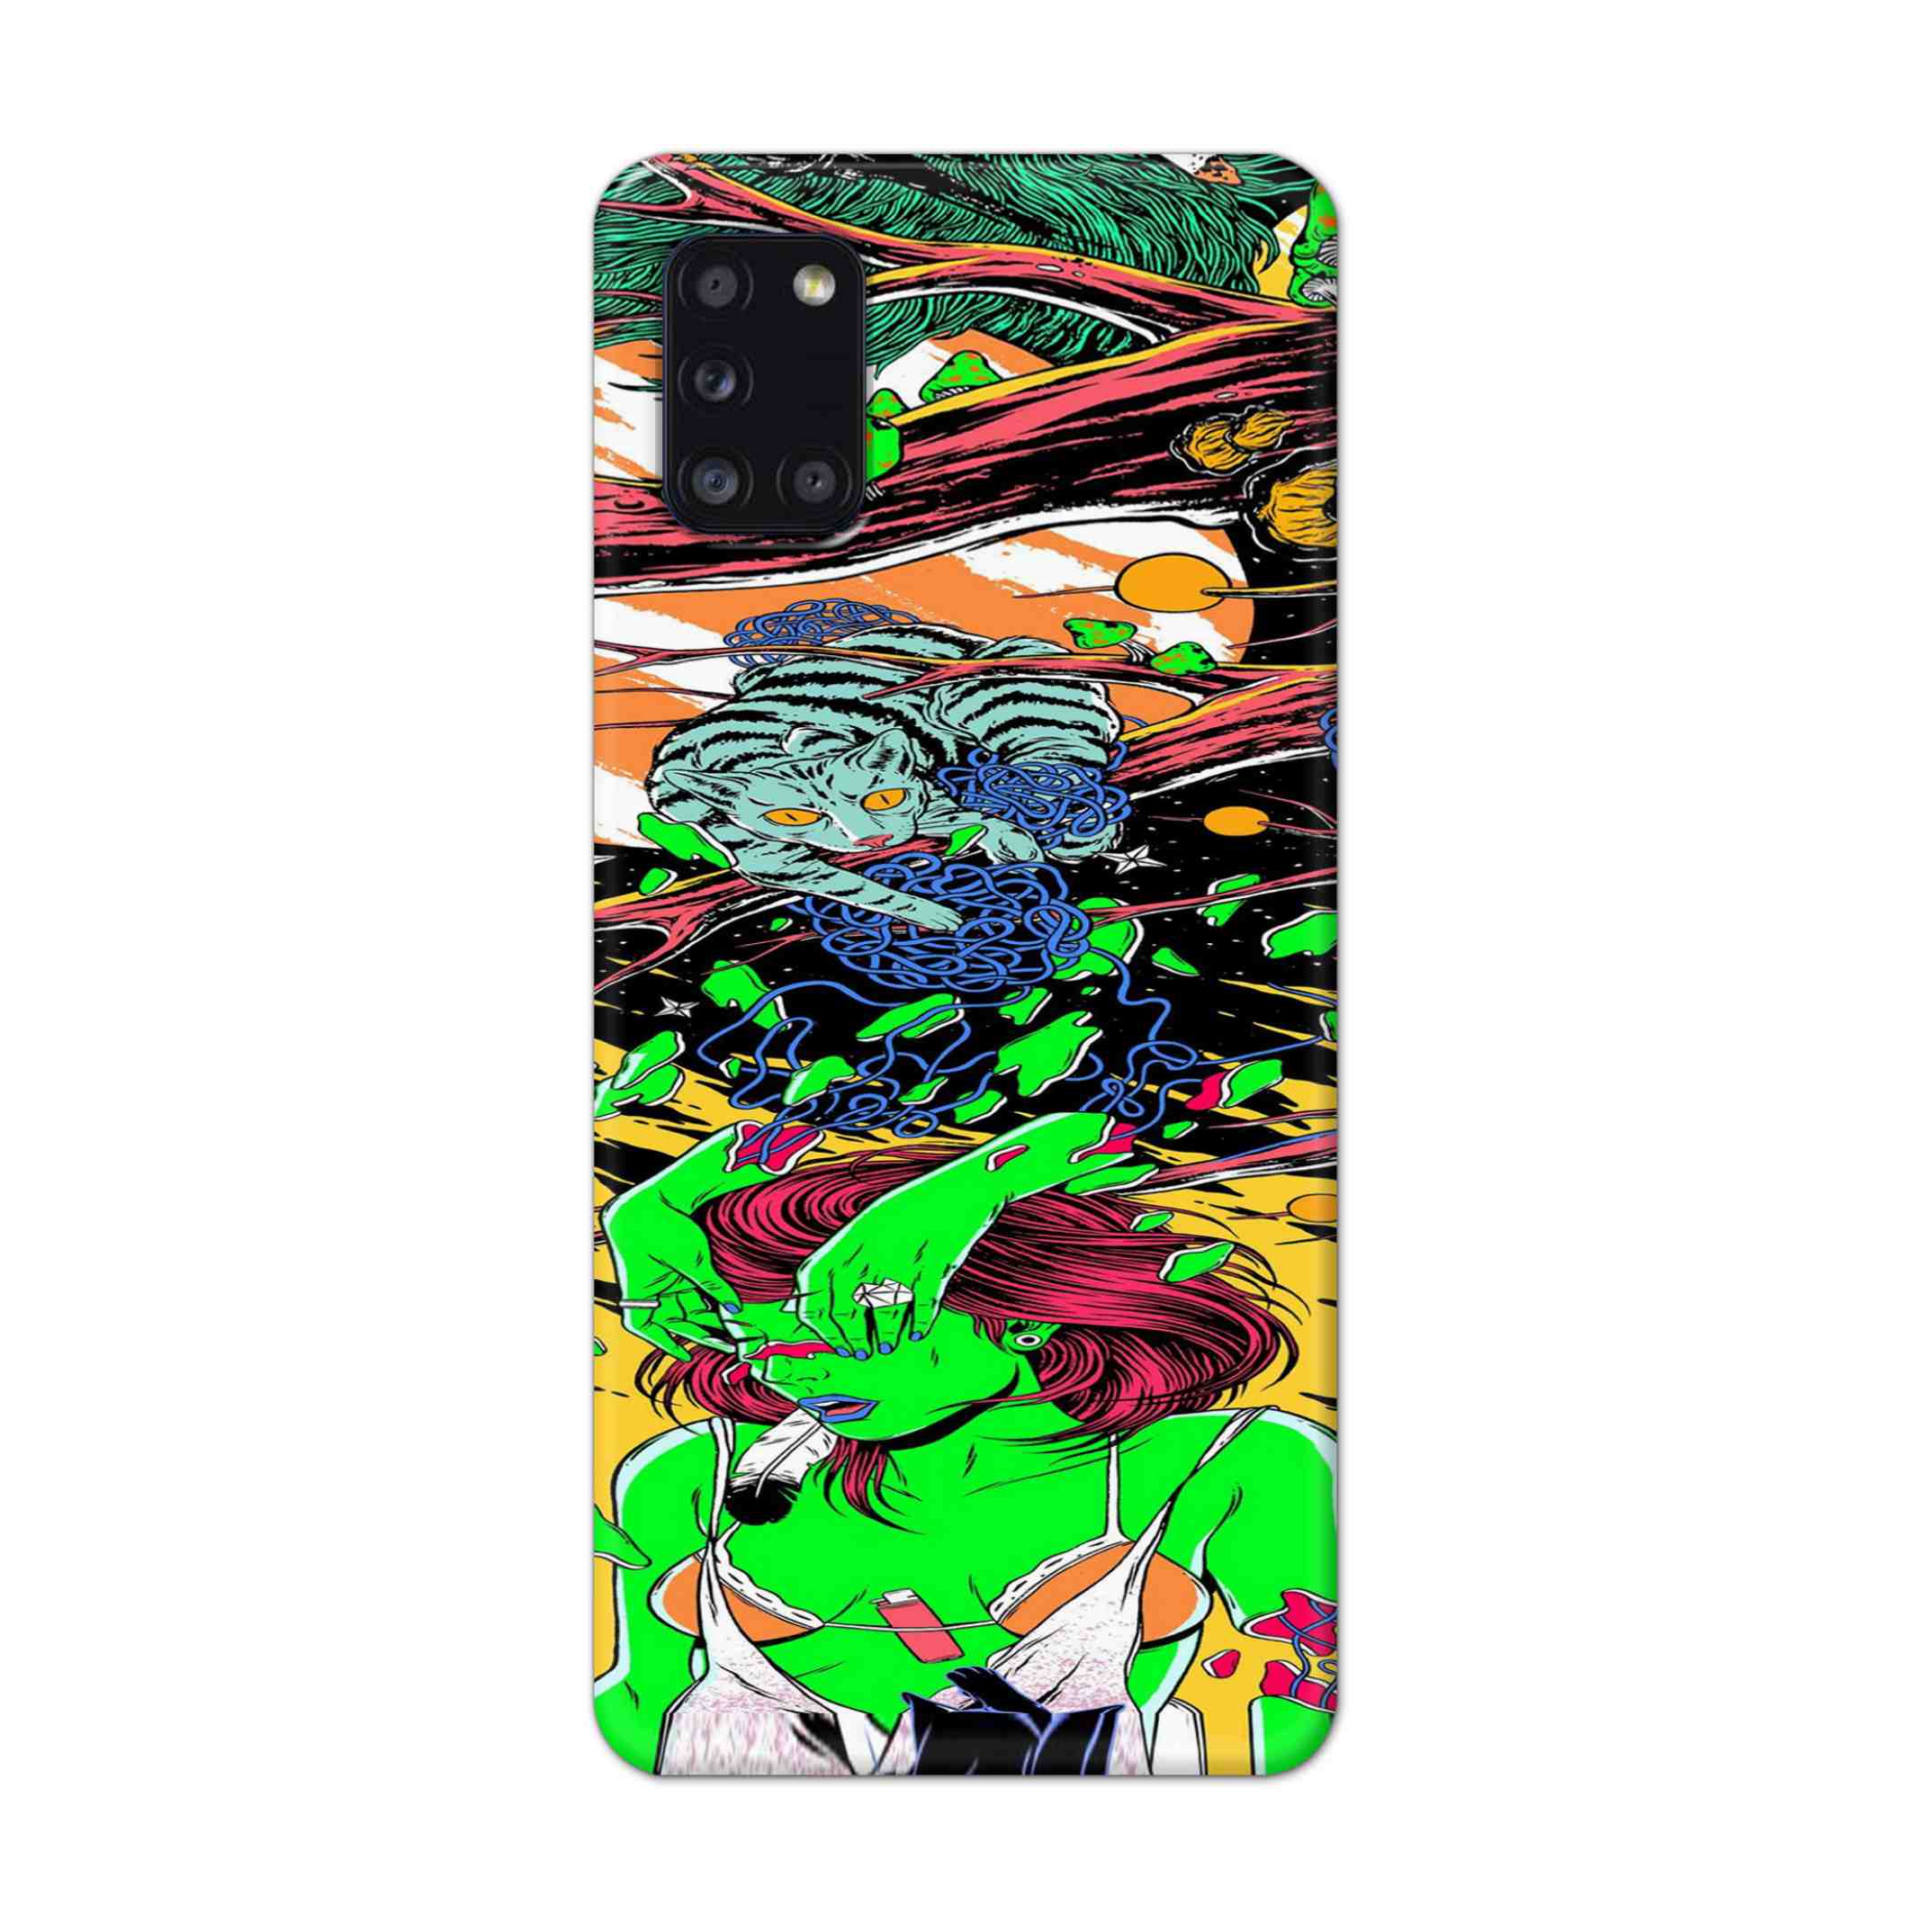 Buy Green Girl Art Hard Back Mobile Phone Case Cover For Samsung Galaxy A31 Online